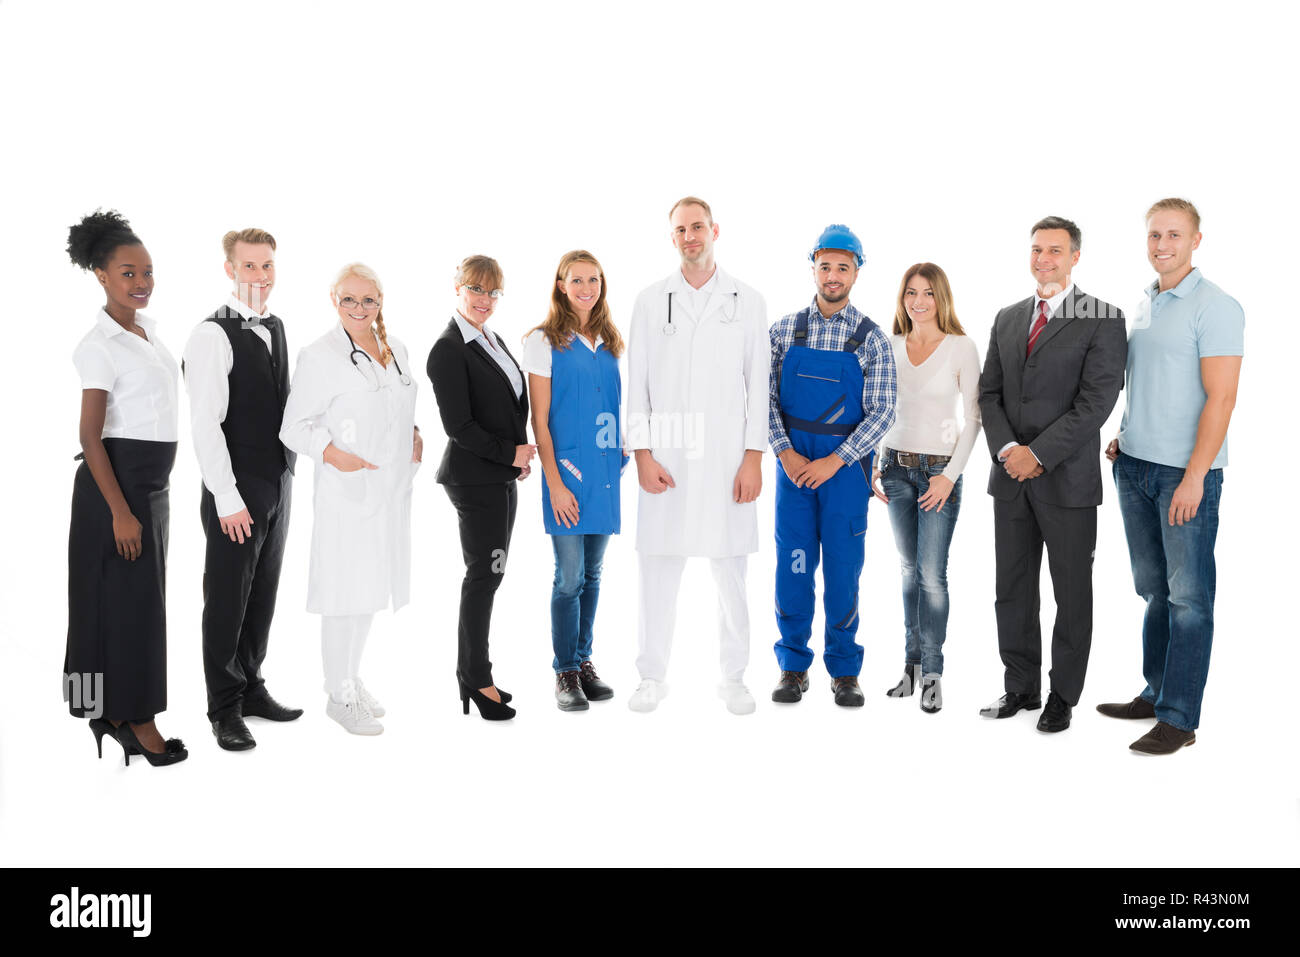 Portrait Of People With Various Occupations Stock Photo